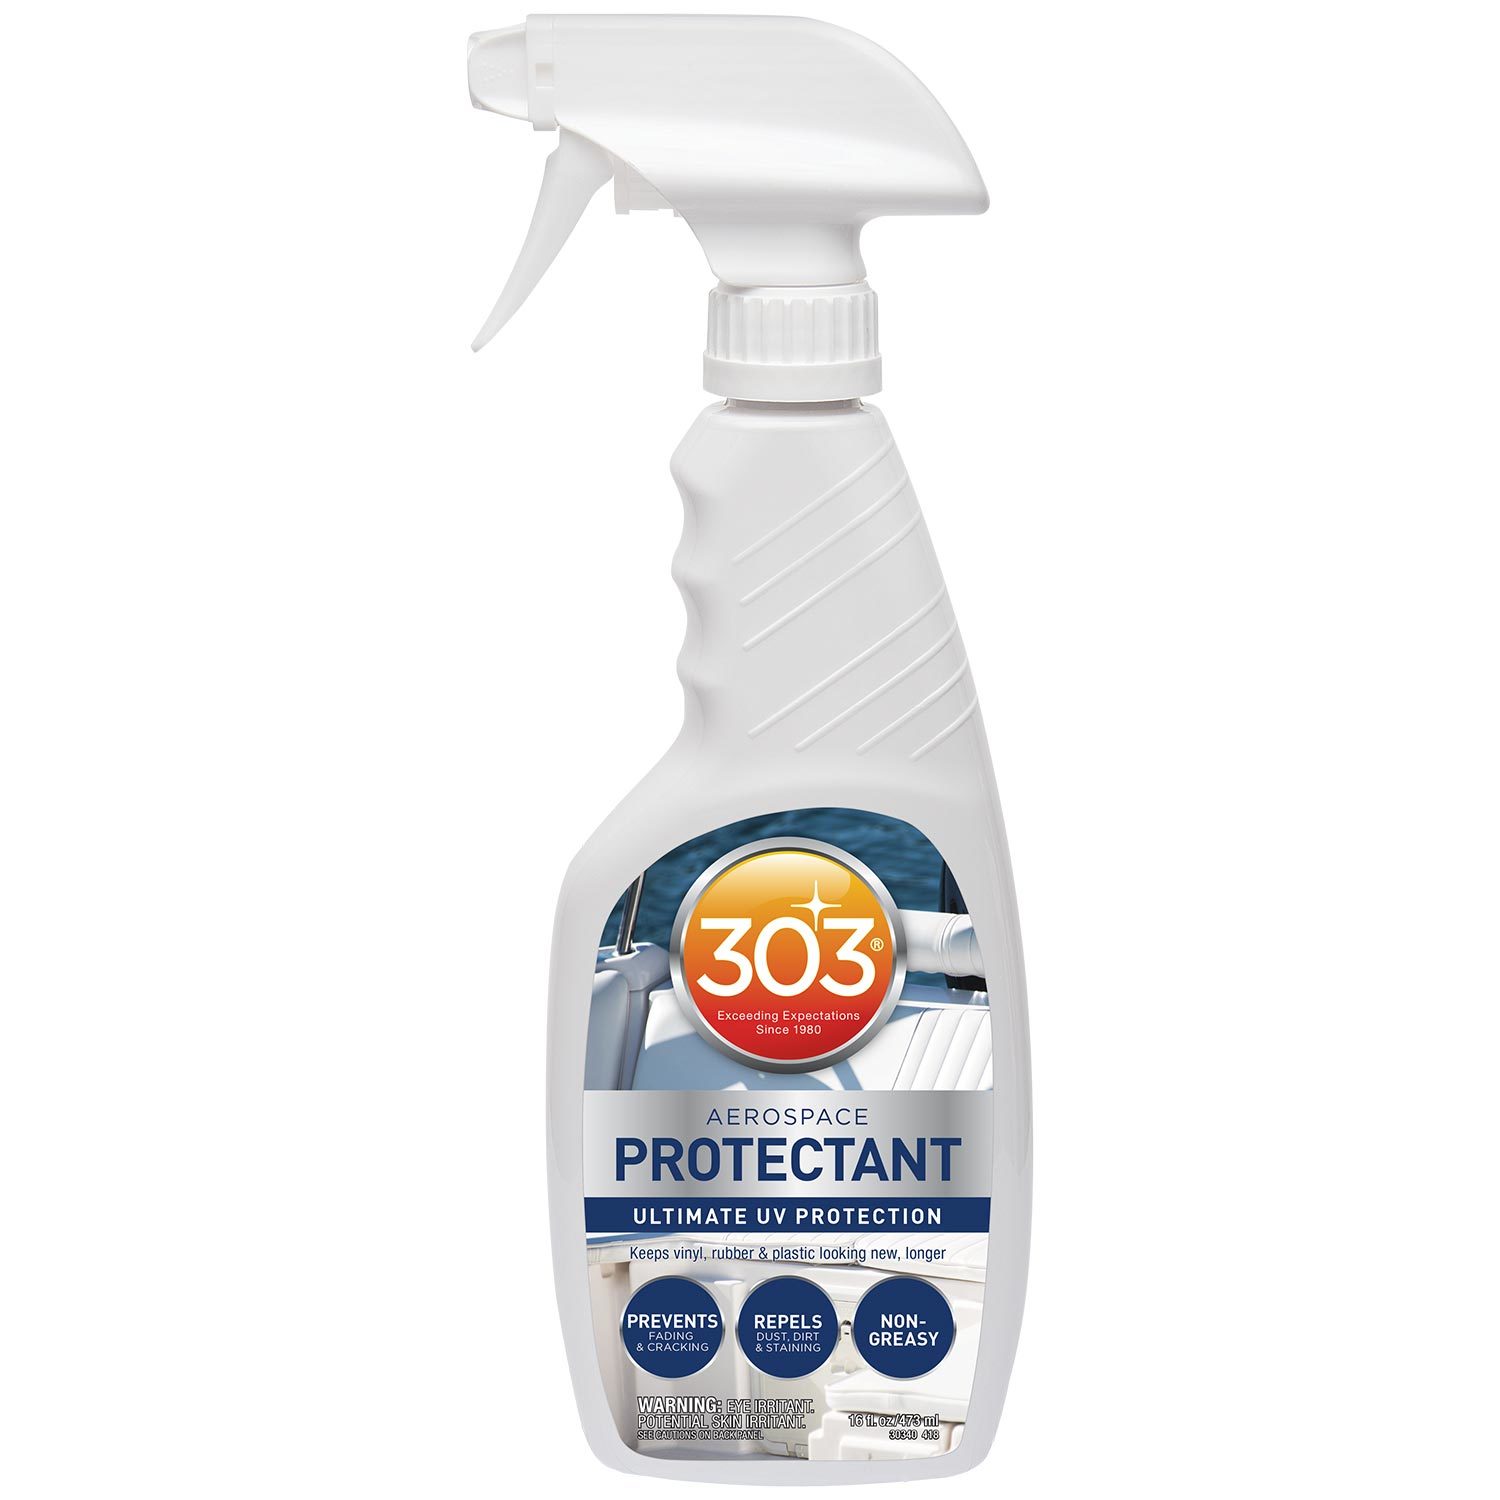 New Waterproofing Spray Fabric Protector Spray for Marine Canvas Boat Tops,  Vinyl Seats and Tent Water Proof 